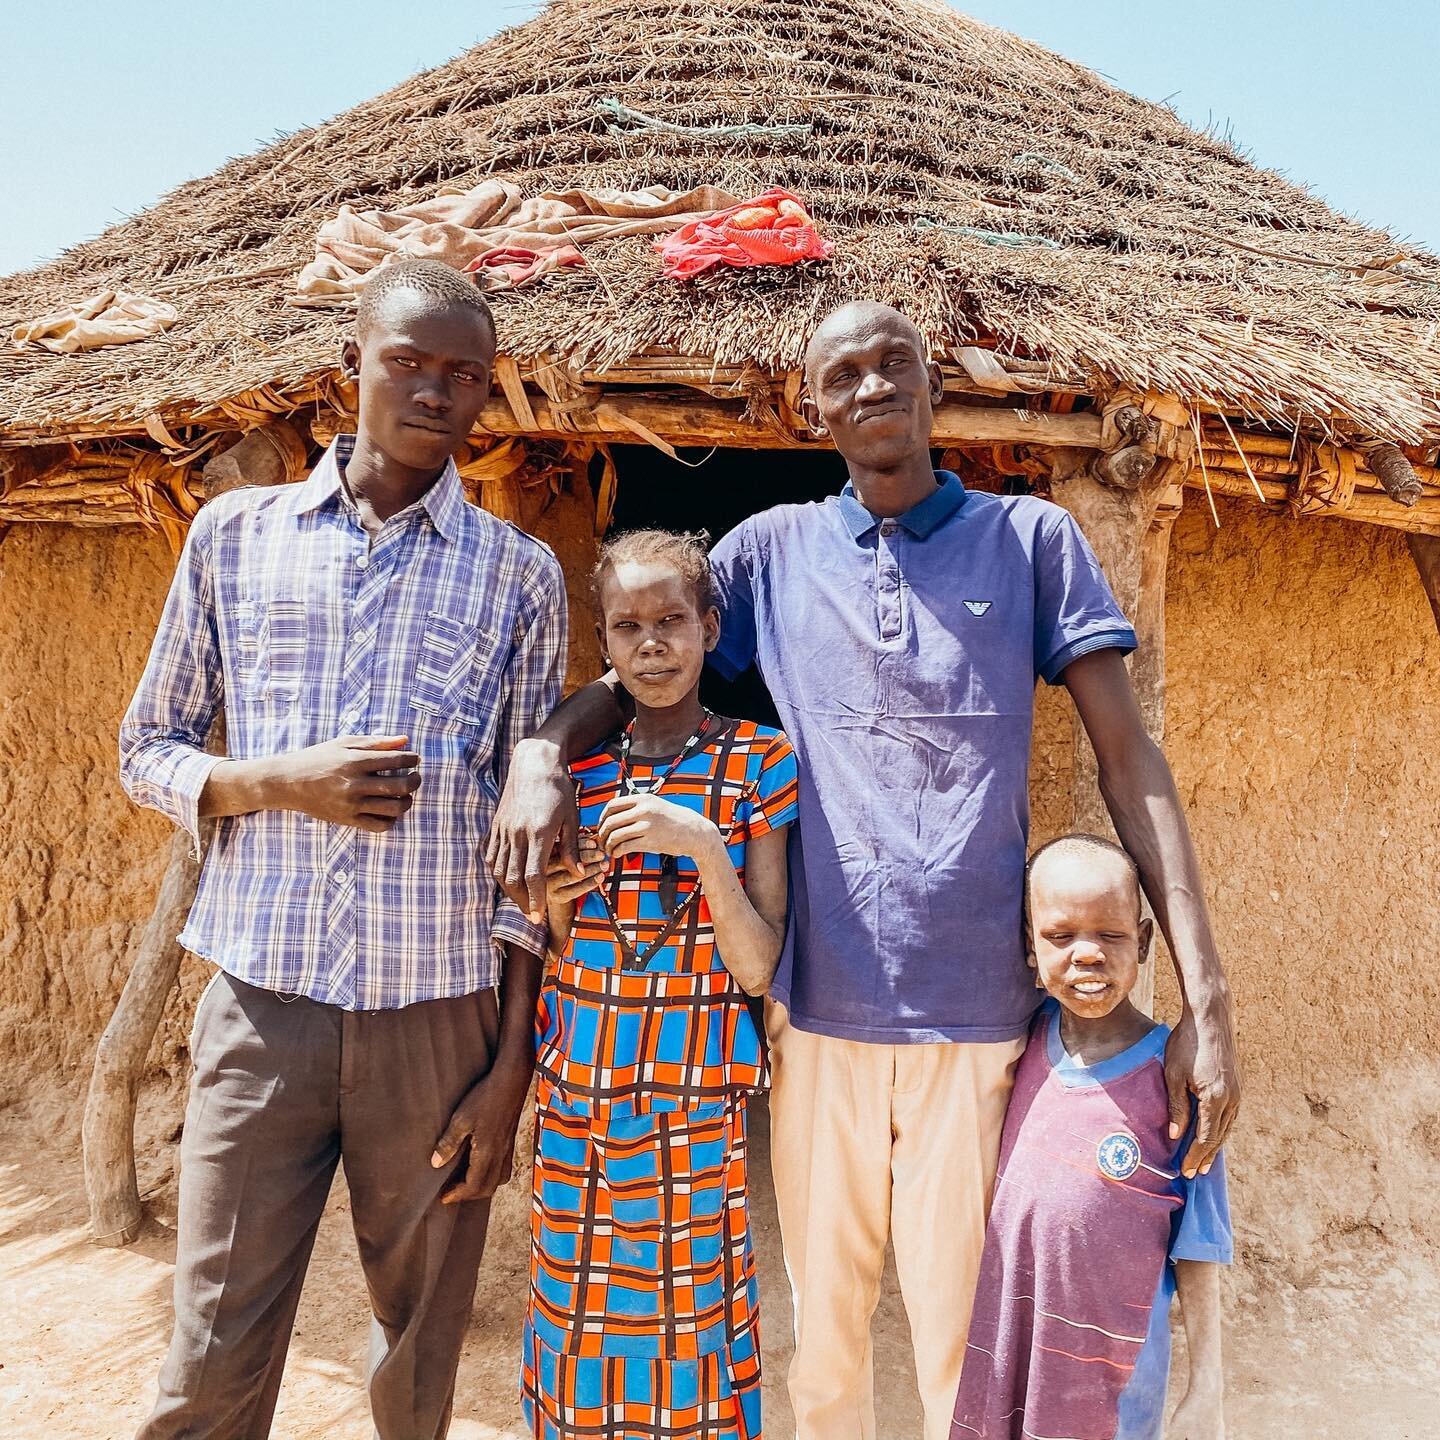 Donating 1 bag of sorghum will feed an entire family for 3-4 months. With proper nourishment and a reliable source of food, James and his siblings have the opportunity to attend school and earn money on the side. 
⁣
For $75 you can help James and his